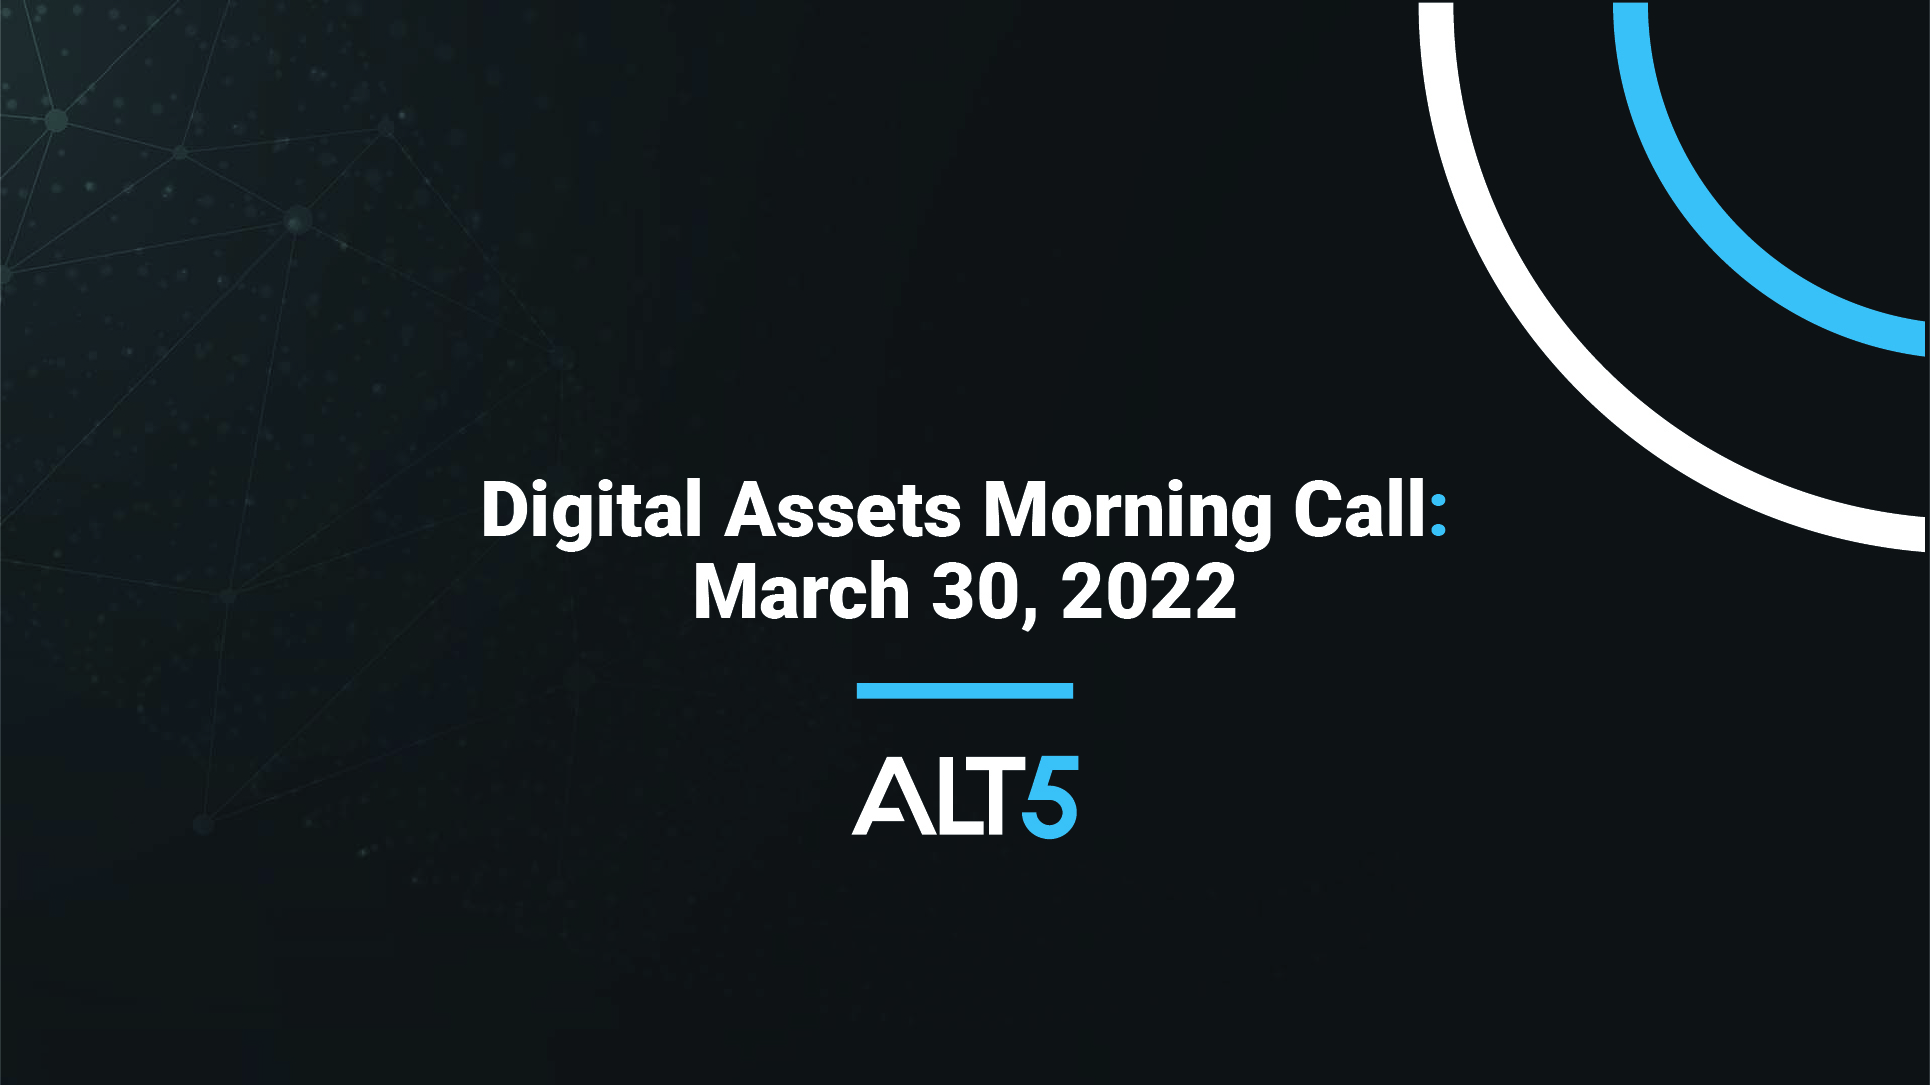 Digital Assets Morning Call: March 30, 2022